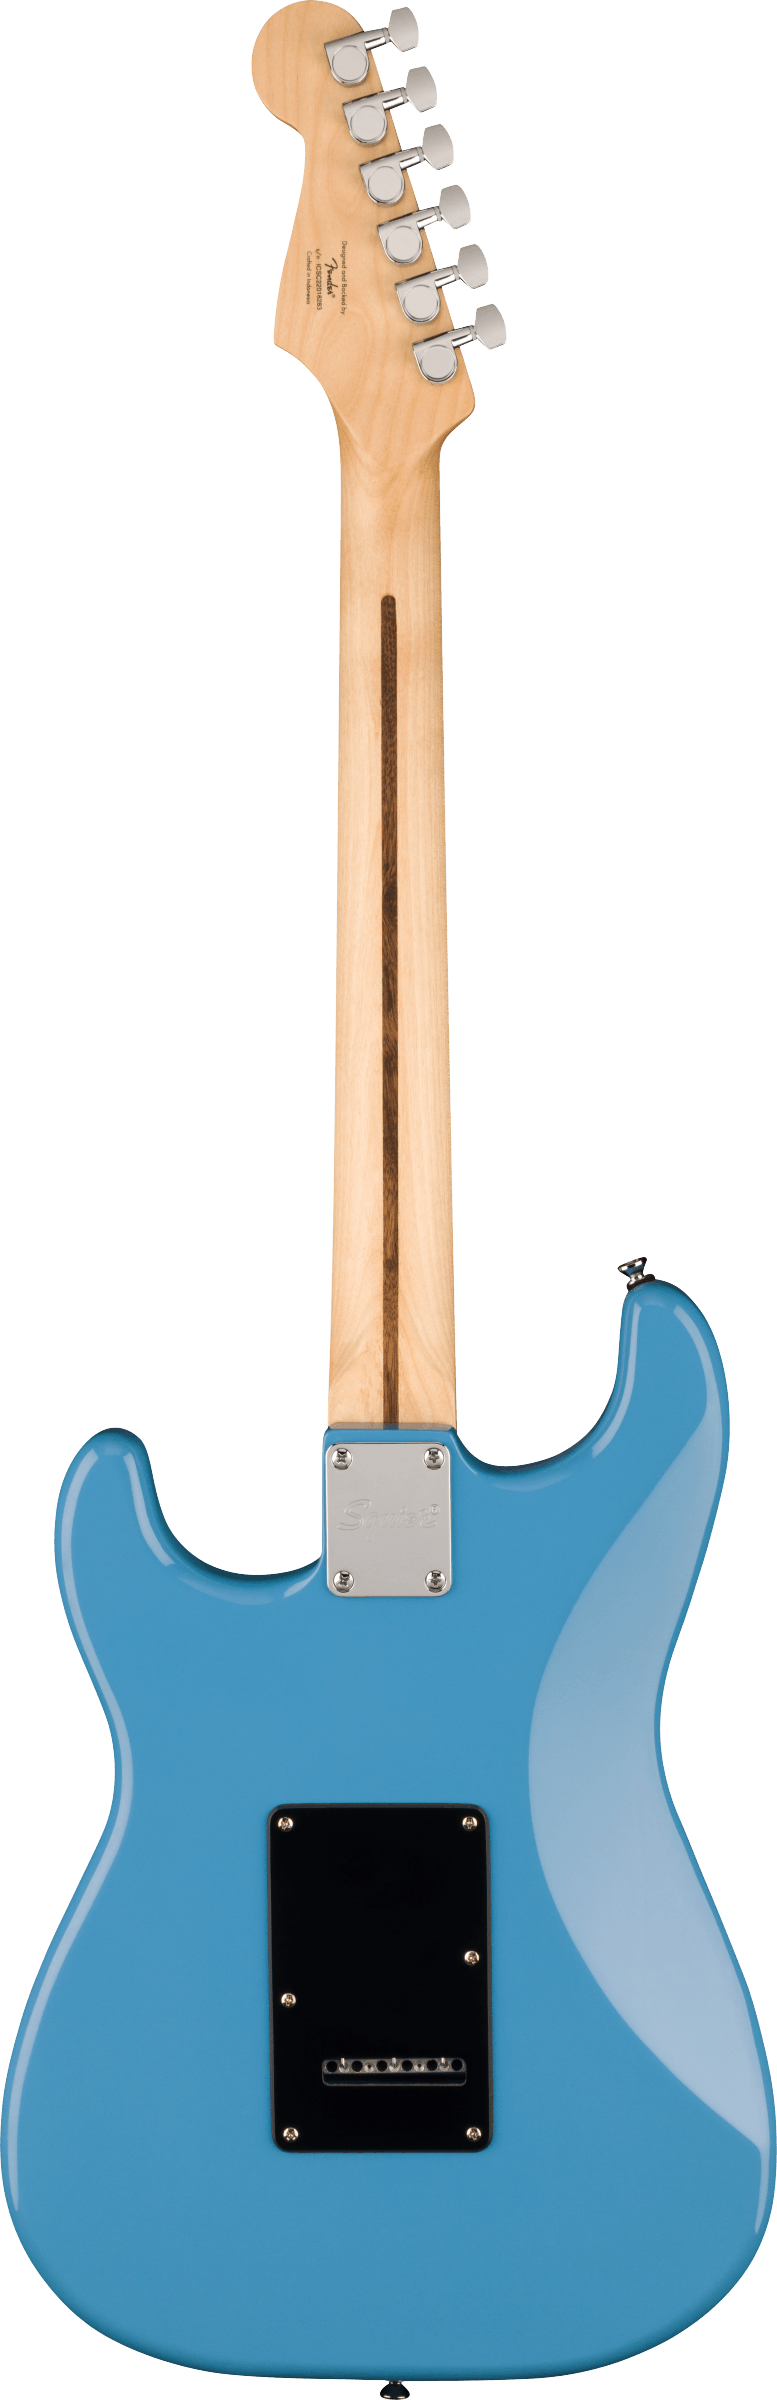 Squier Sonic Stratocaster Electric Guitar - California Blue - Joondalup Music Centre